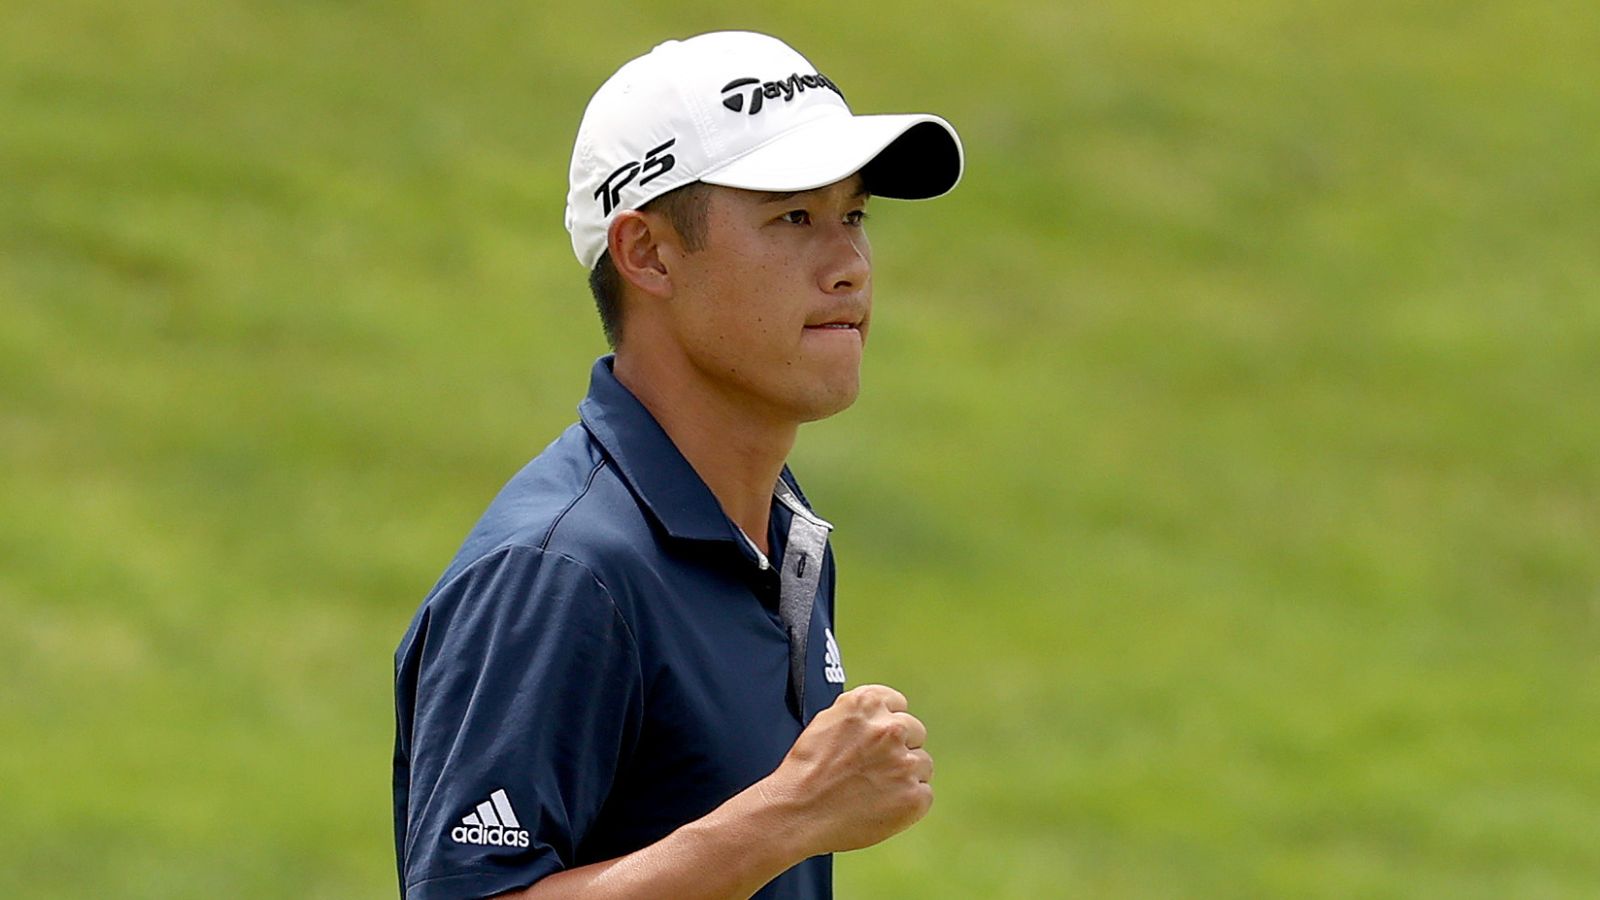 Collin Morikawa upsets Justin Thomas to win Workday Charity Open in